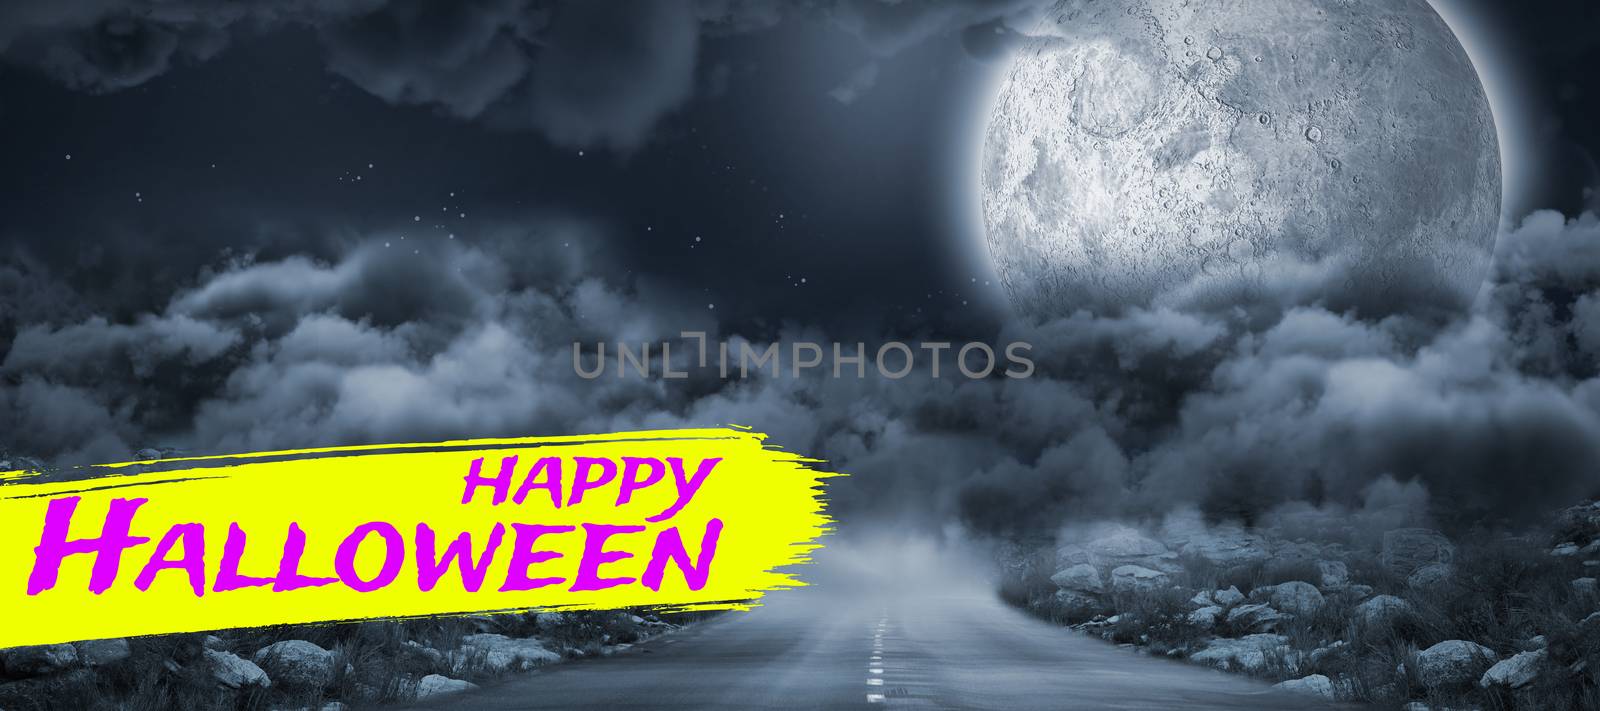 Digital image of happy Halloween text against landscape of a road between stone in front of the moon 